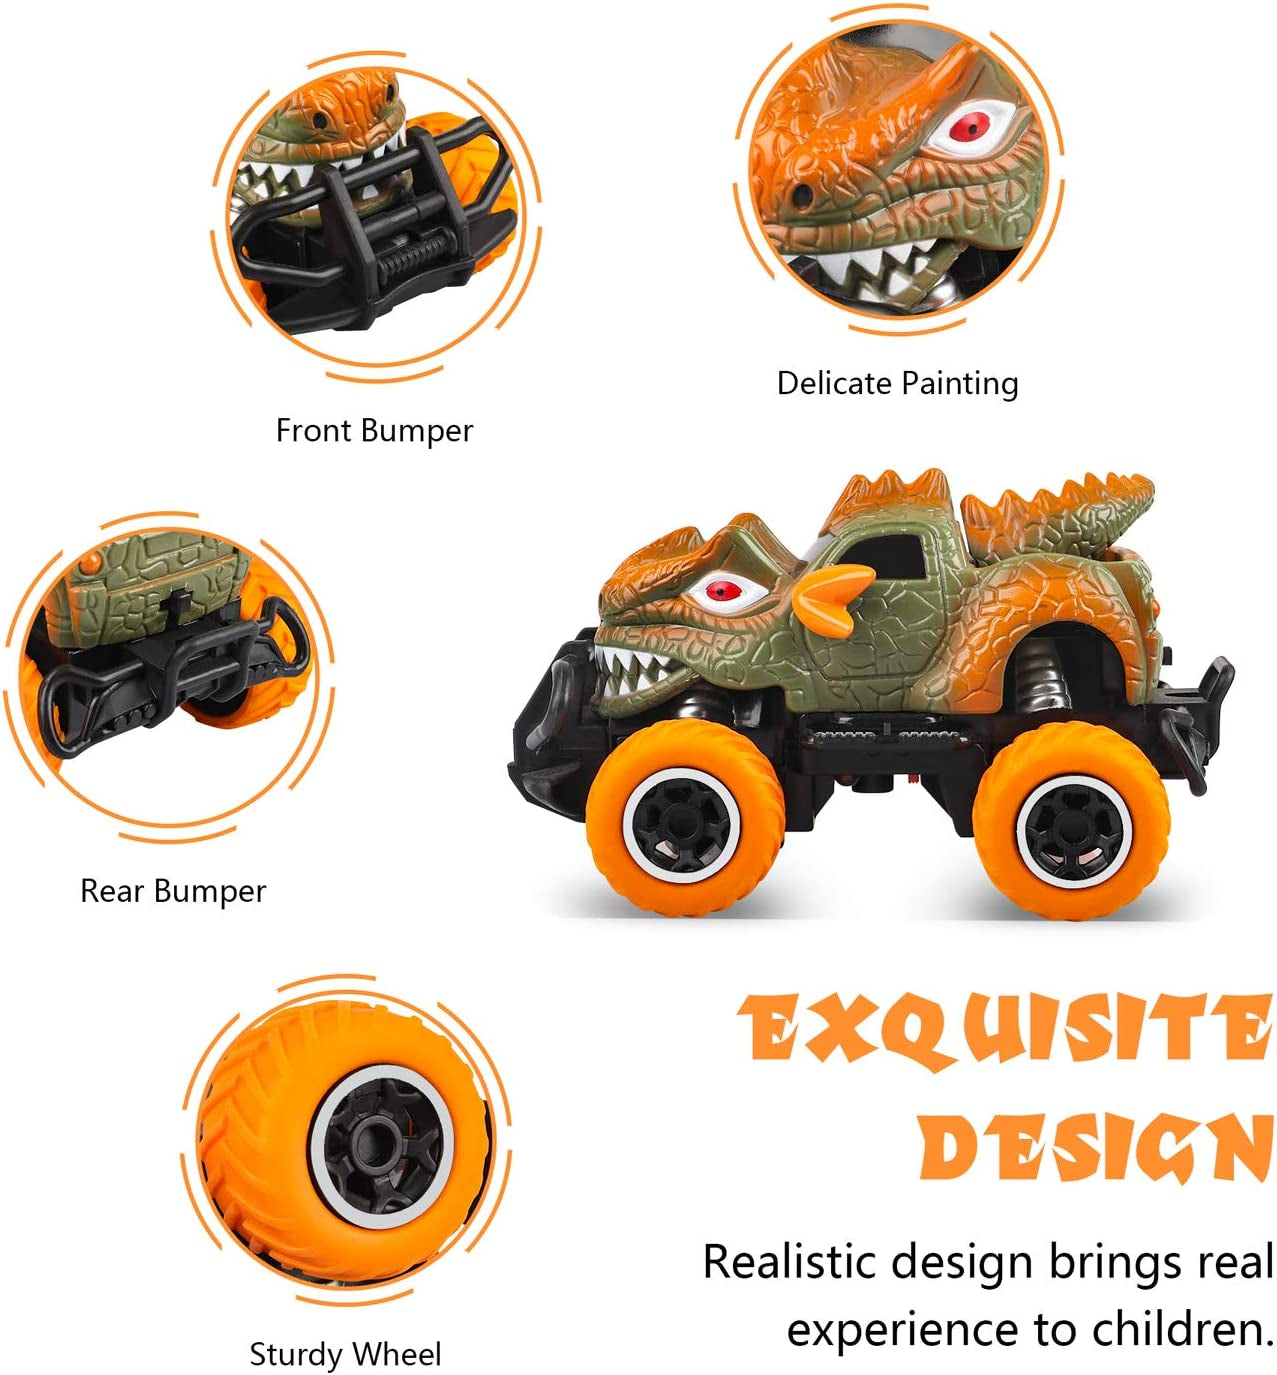 RC Toys for 4-5 Year Old Boys Dinosaur Remote Control Cars, Mini Dino Cars for Kids Toys Age 3-6 RC Race Trucks, 2021 Monster Truck for Toddlers Birthday Gifts (Orange)